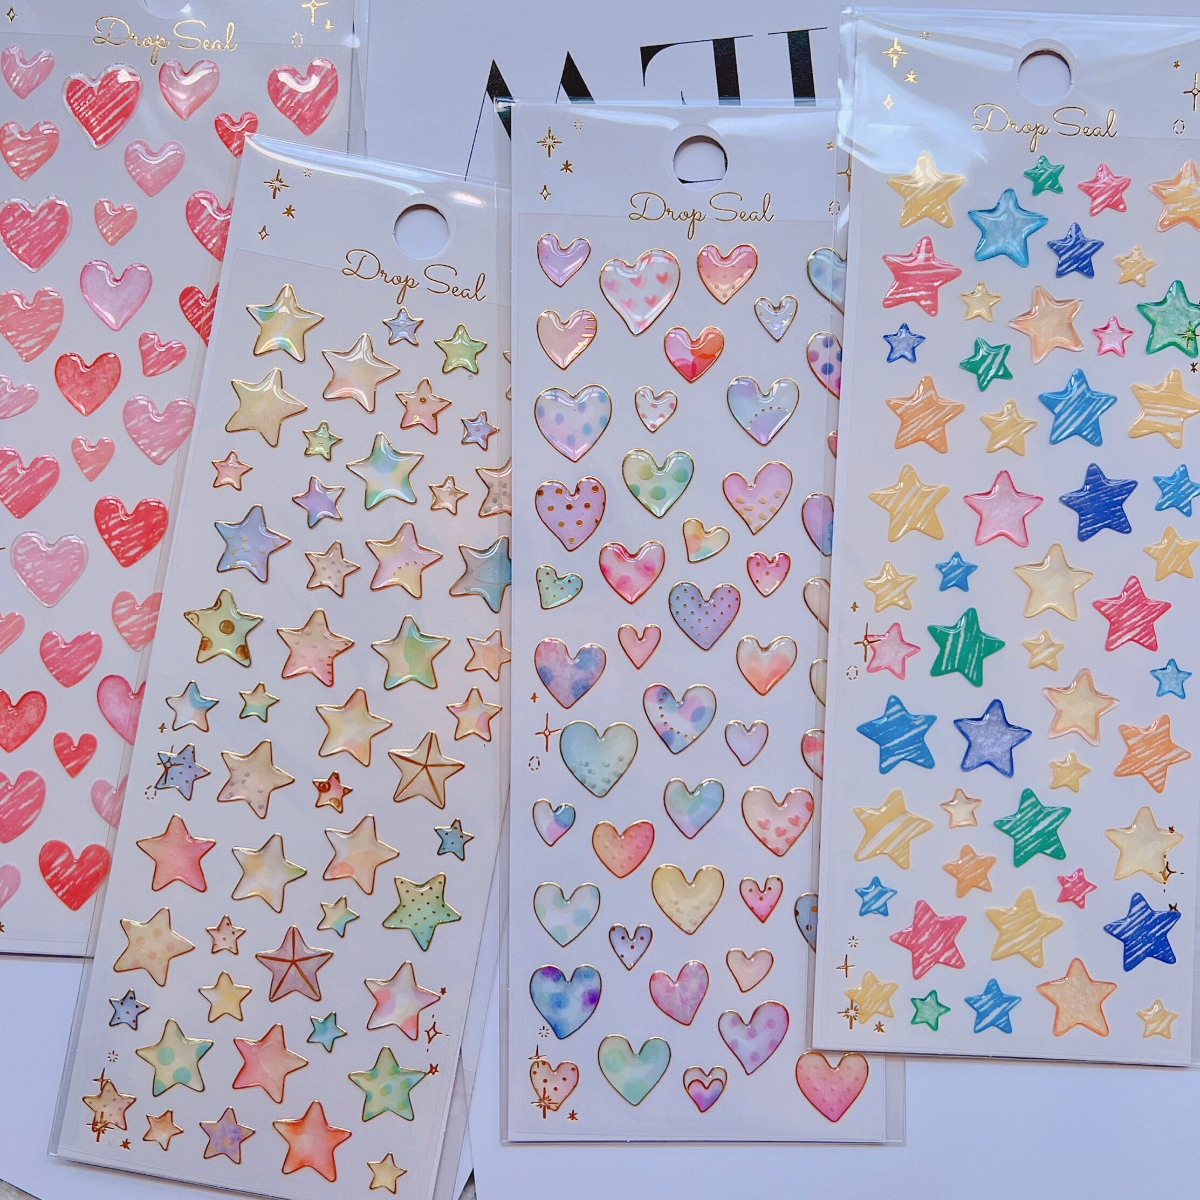 emmoolife 6 Sets 300 Pcs Washi Stickers Set Cute Aesthetic Sticker Book for Journaling, DIY Decorative Paper Sticker Decals for Bullet Journal Art